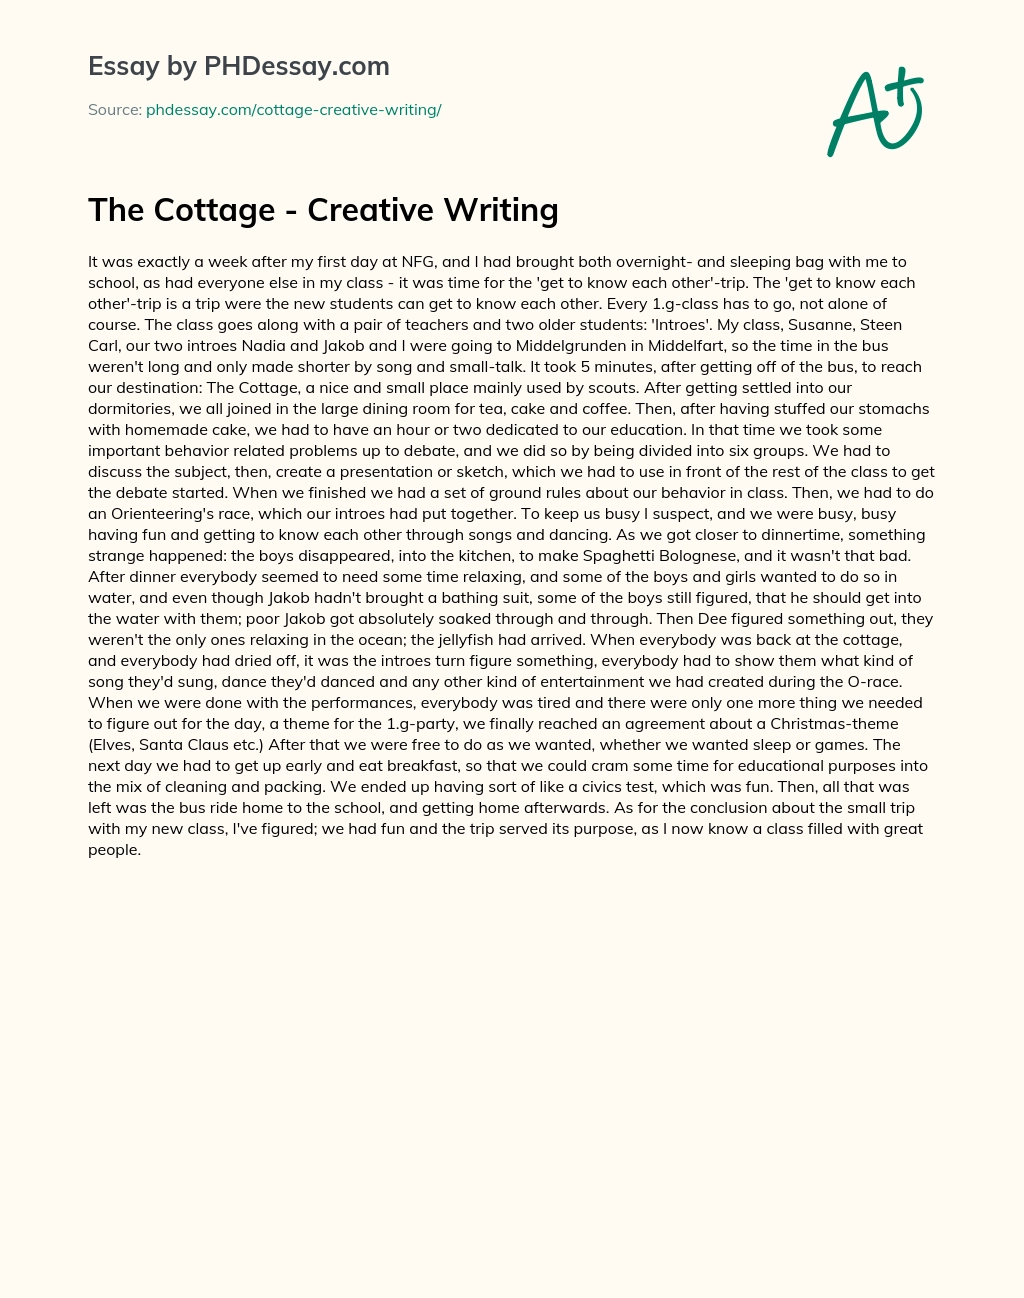 The Cottage – Creative Writing essay